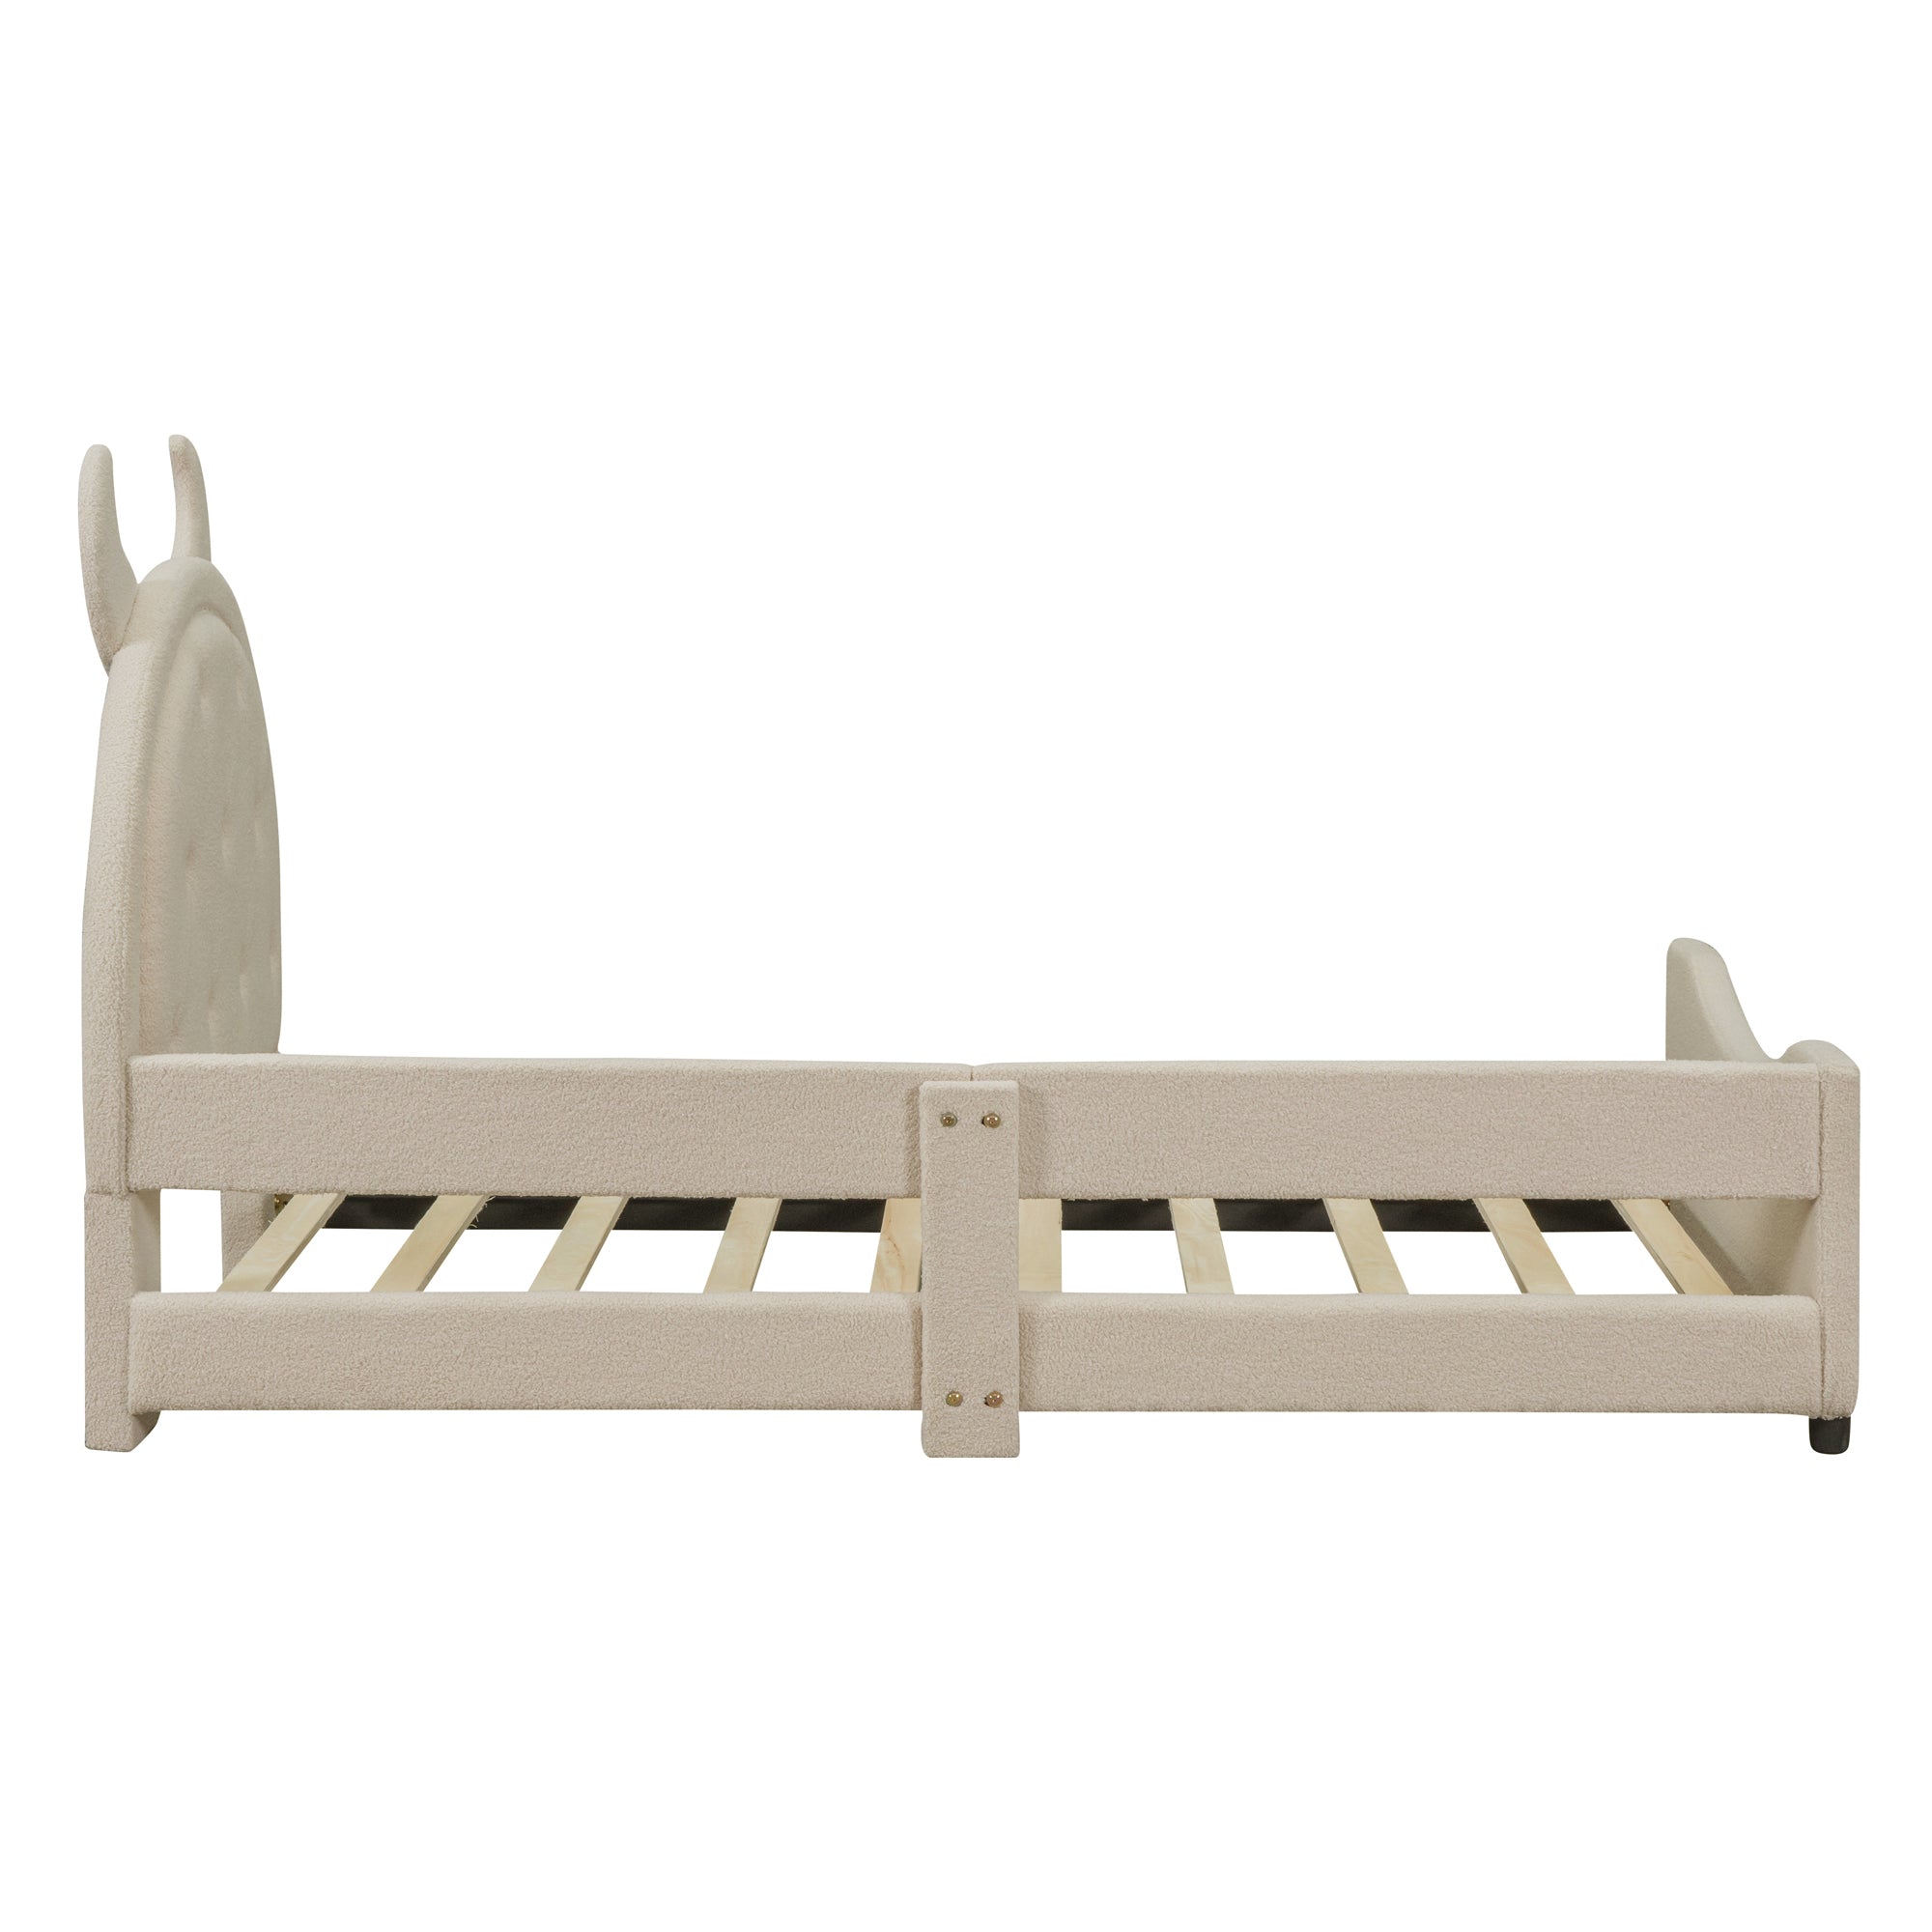 Teddy Fleece Twin Size Upholstered Daybed with OX Horn beige-upholstered